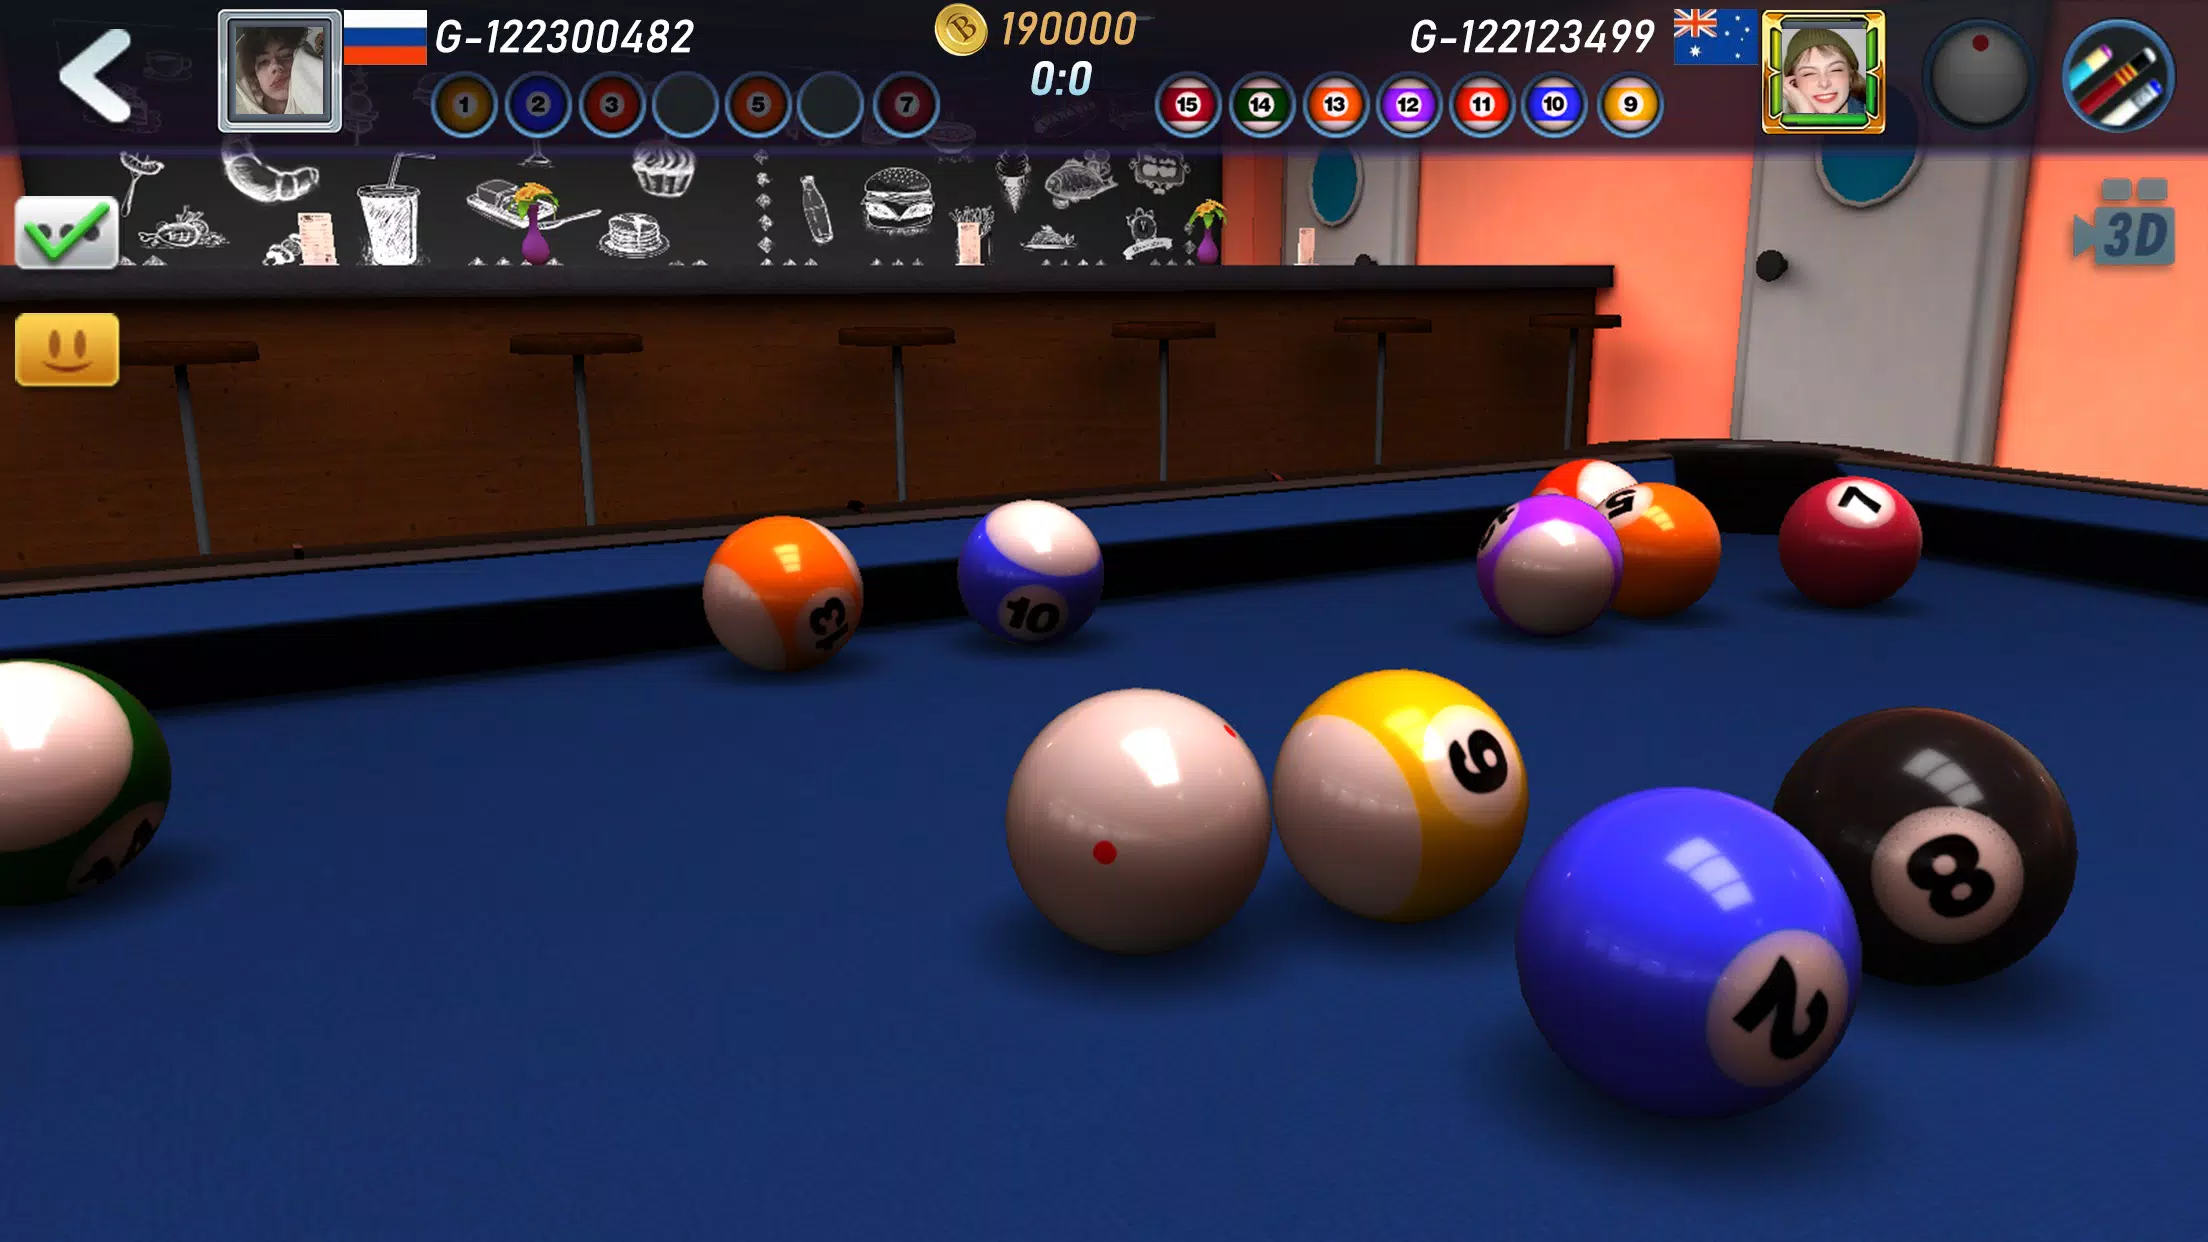 Real Pool 3D 2 APK for Android Download